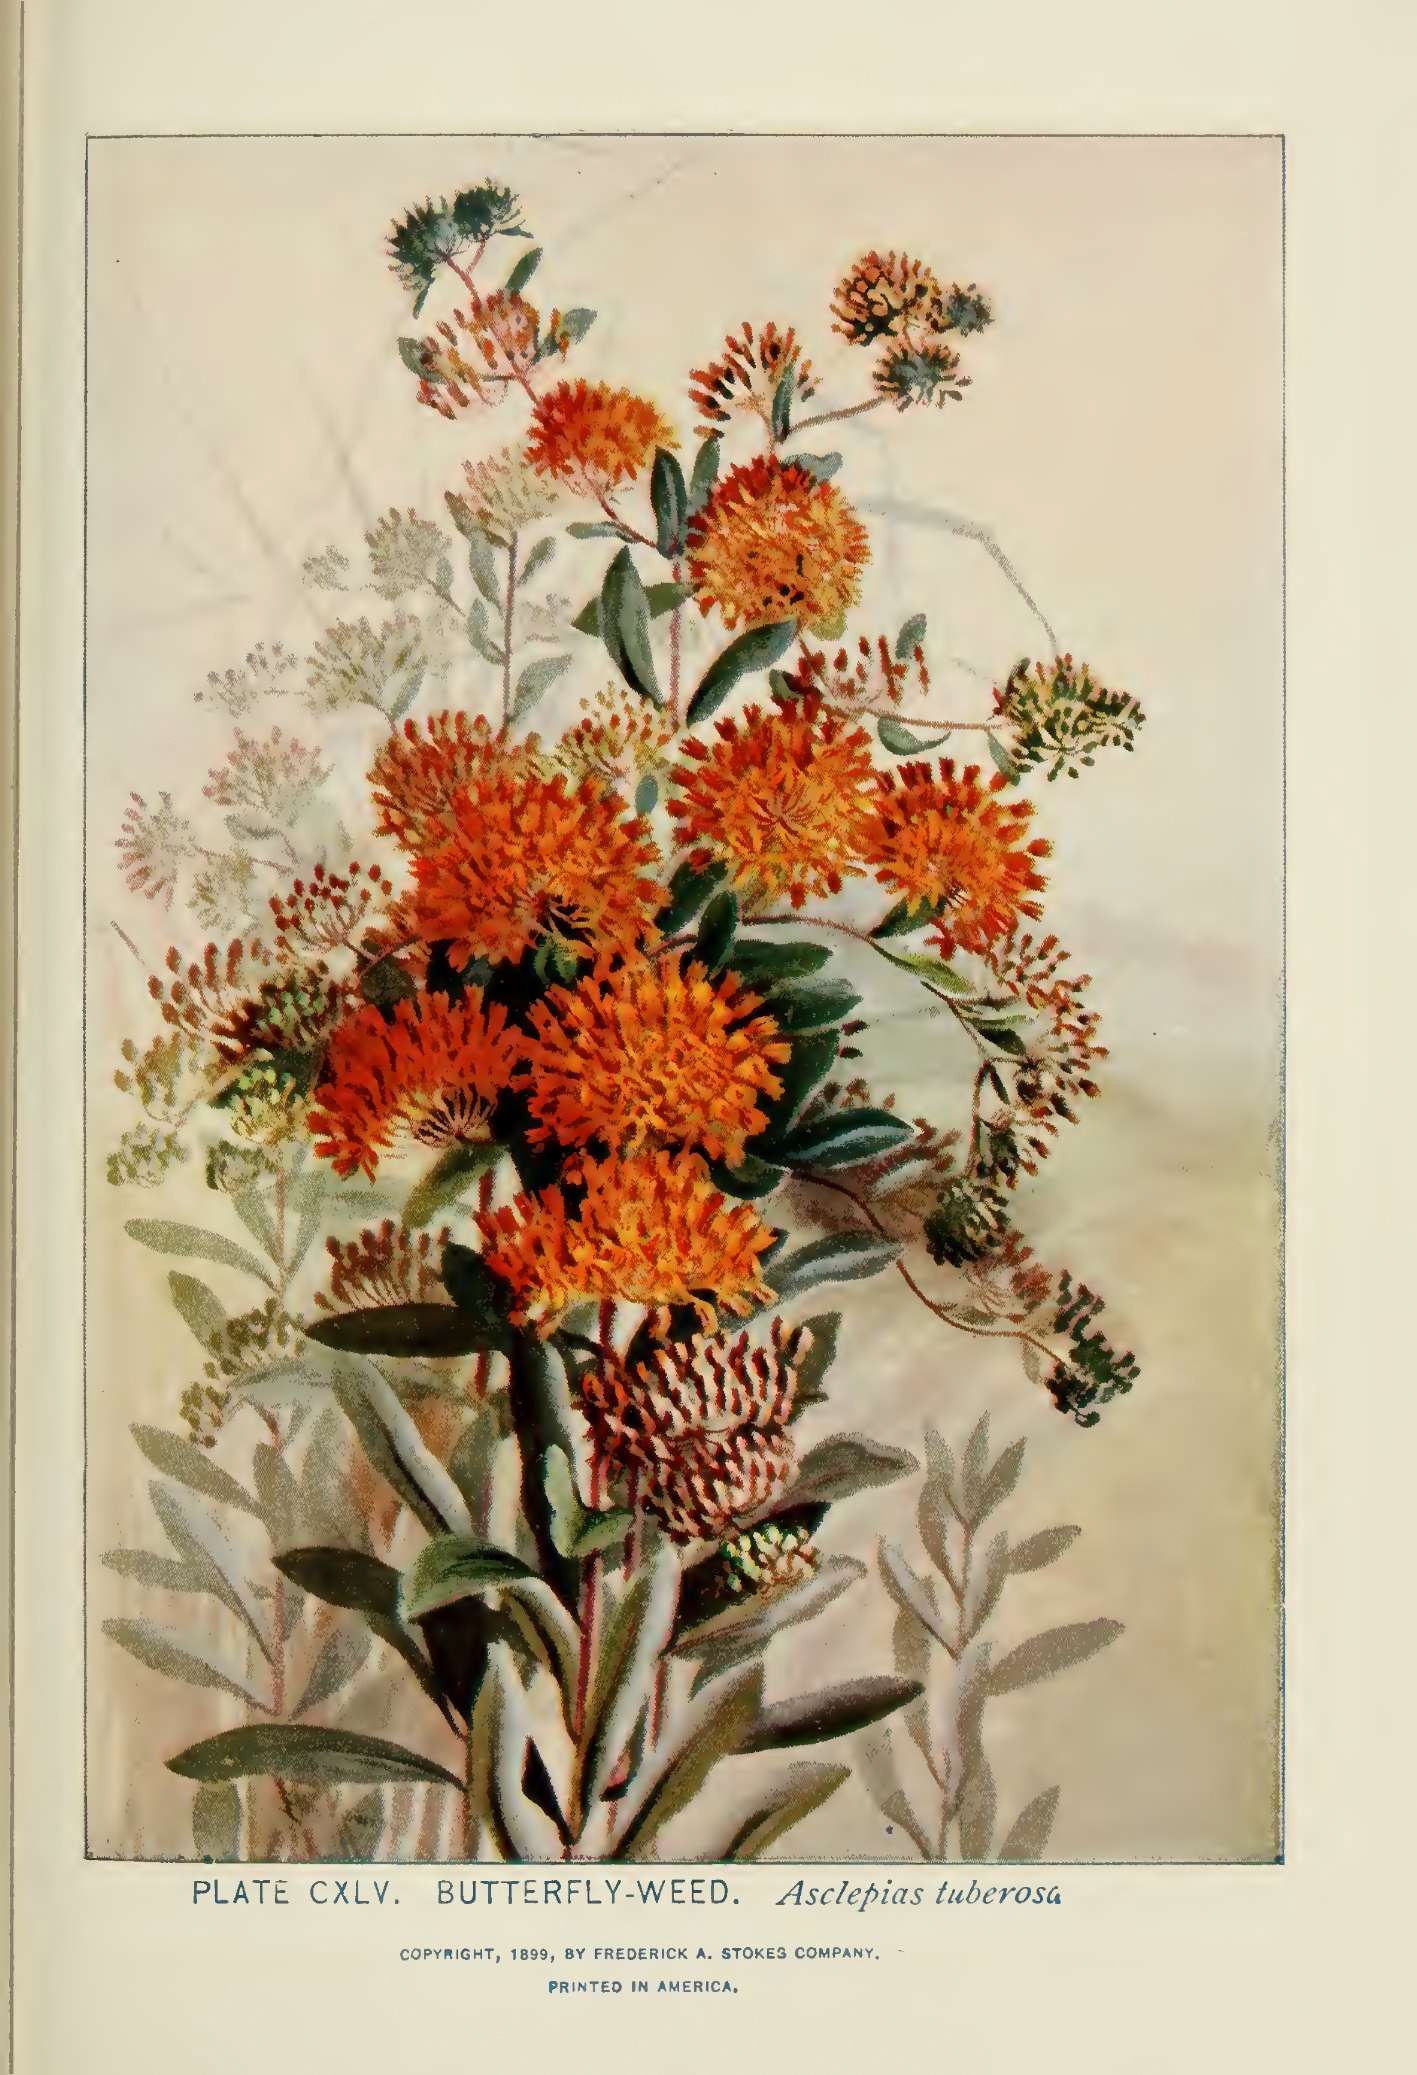  Butterfly-Weed  (Asclepias tuberosa) illustration by Alice Lounsberry circa 1899.